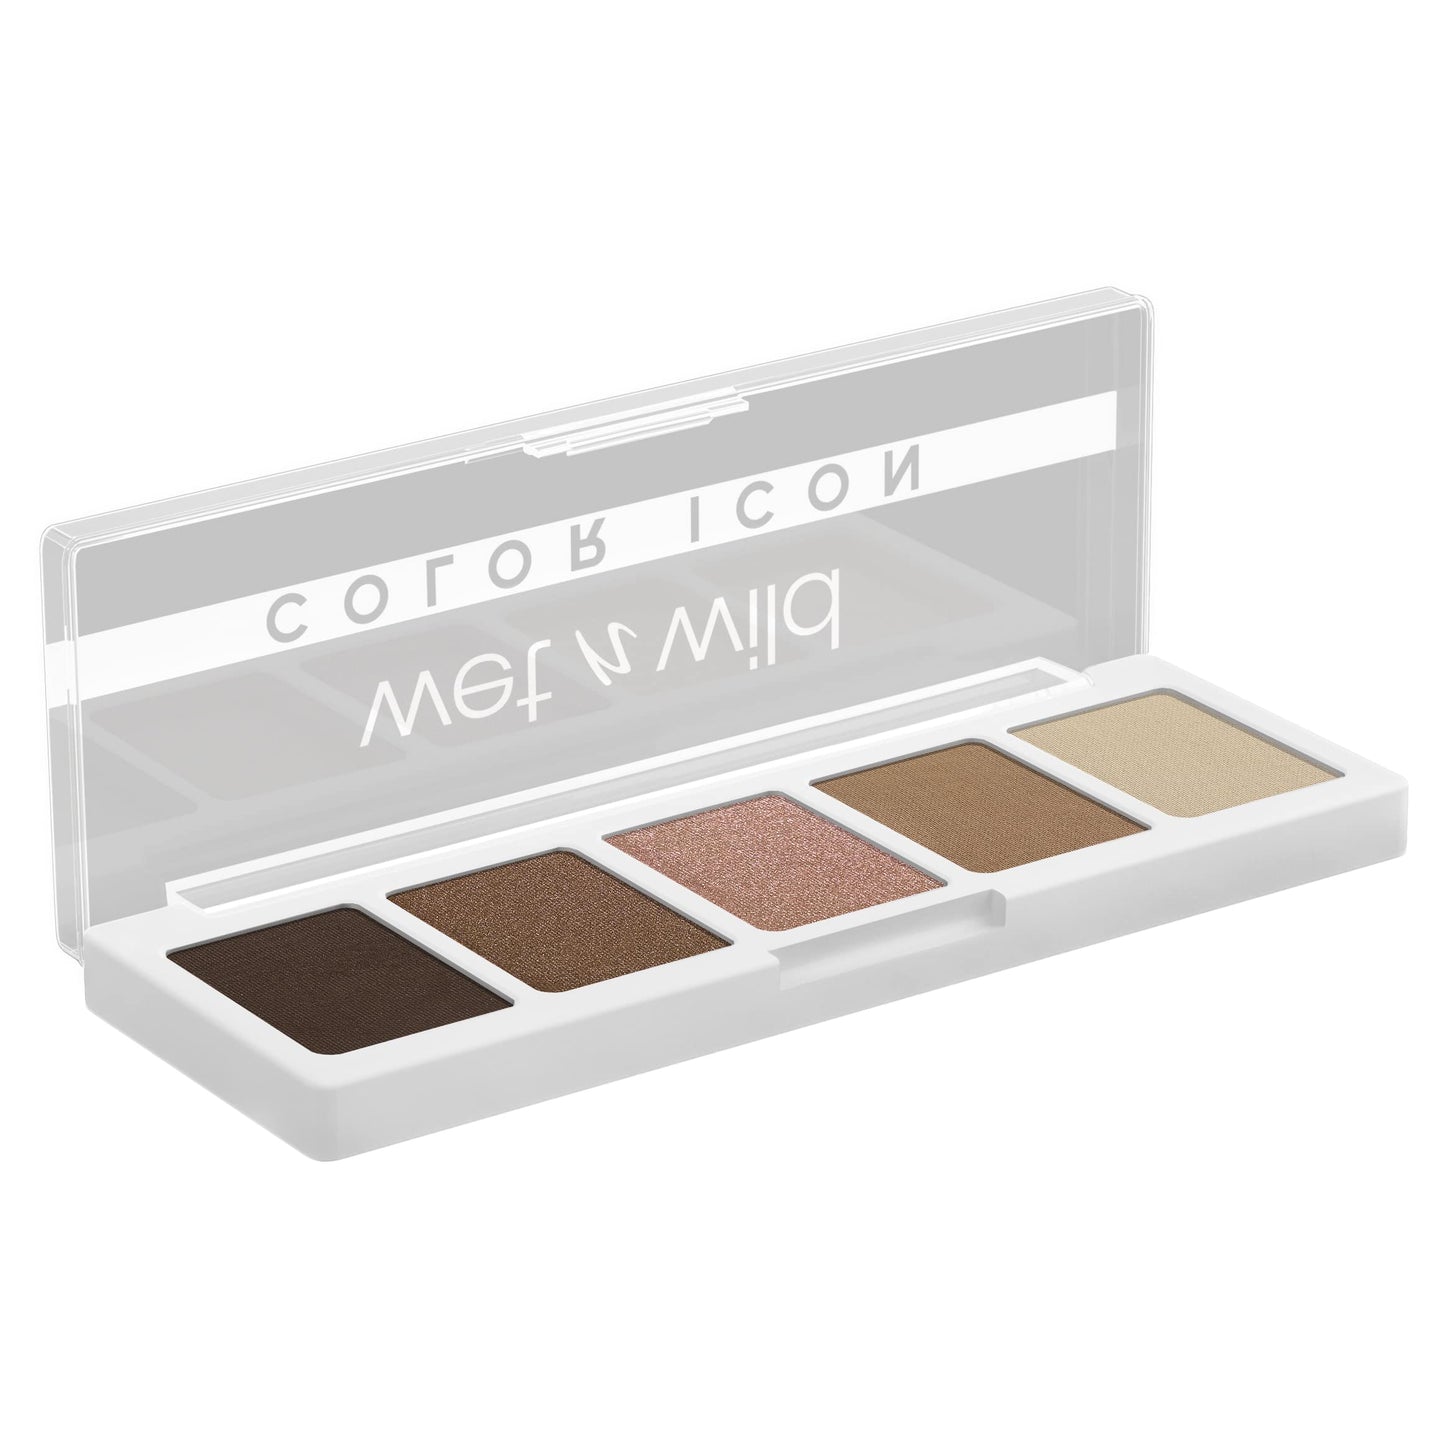 Wet 'N' Wild, Color Icon 5-Pan Palette, Eyeshadow Palette, 5 Richly Pigmented Colors For Everyday MakEUp, Long-Lasting And Easy To Blend Formula, Walking On Eggshells